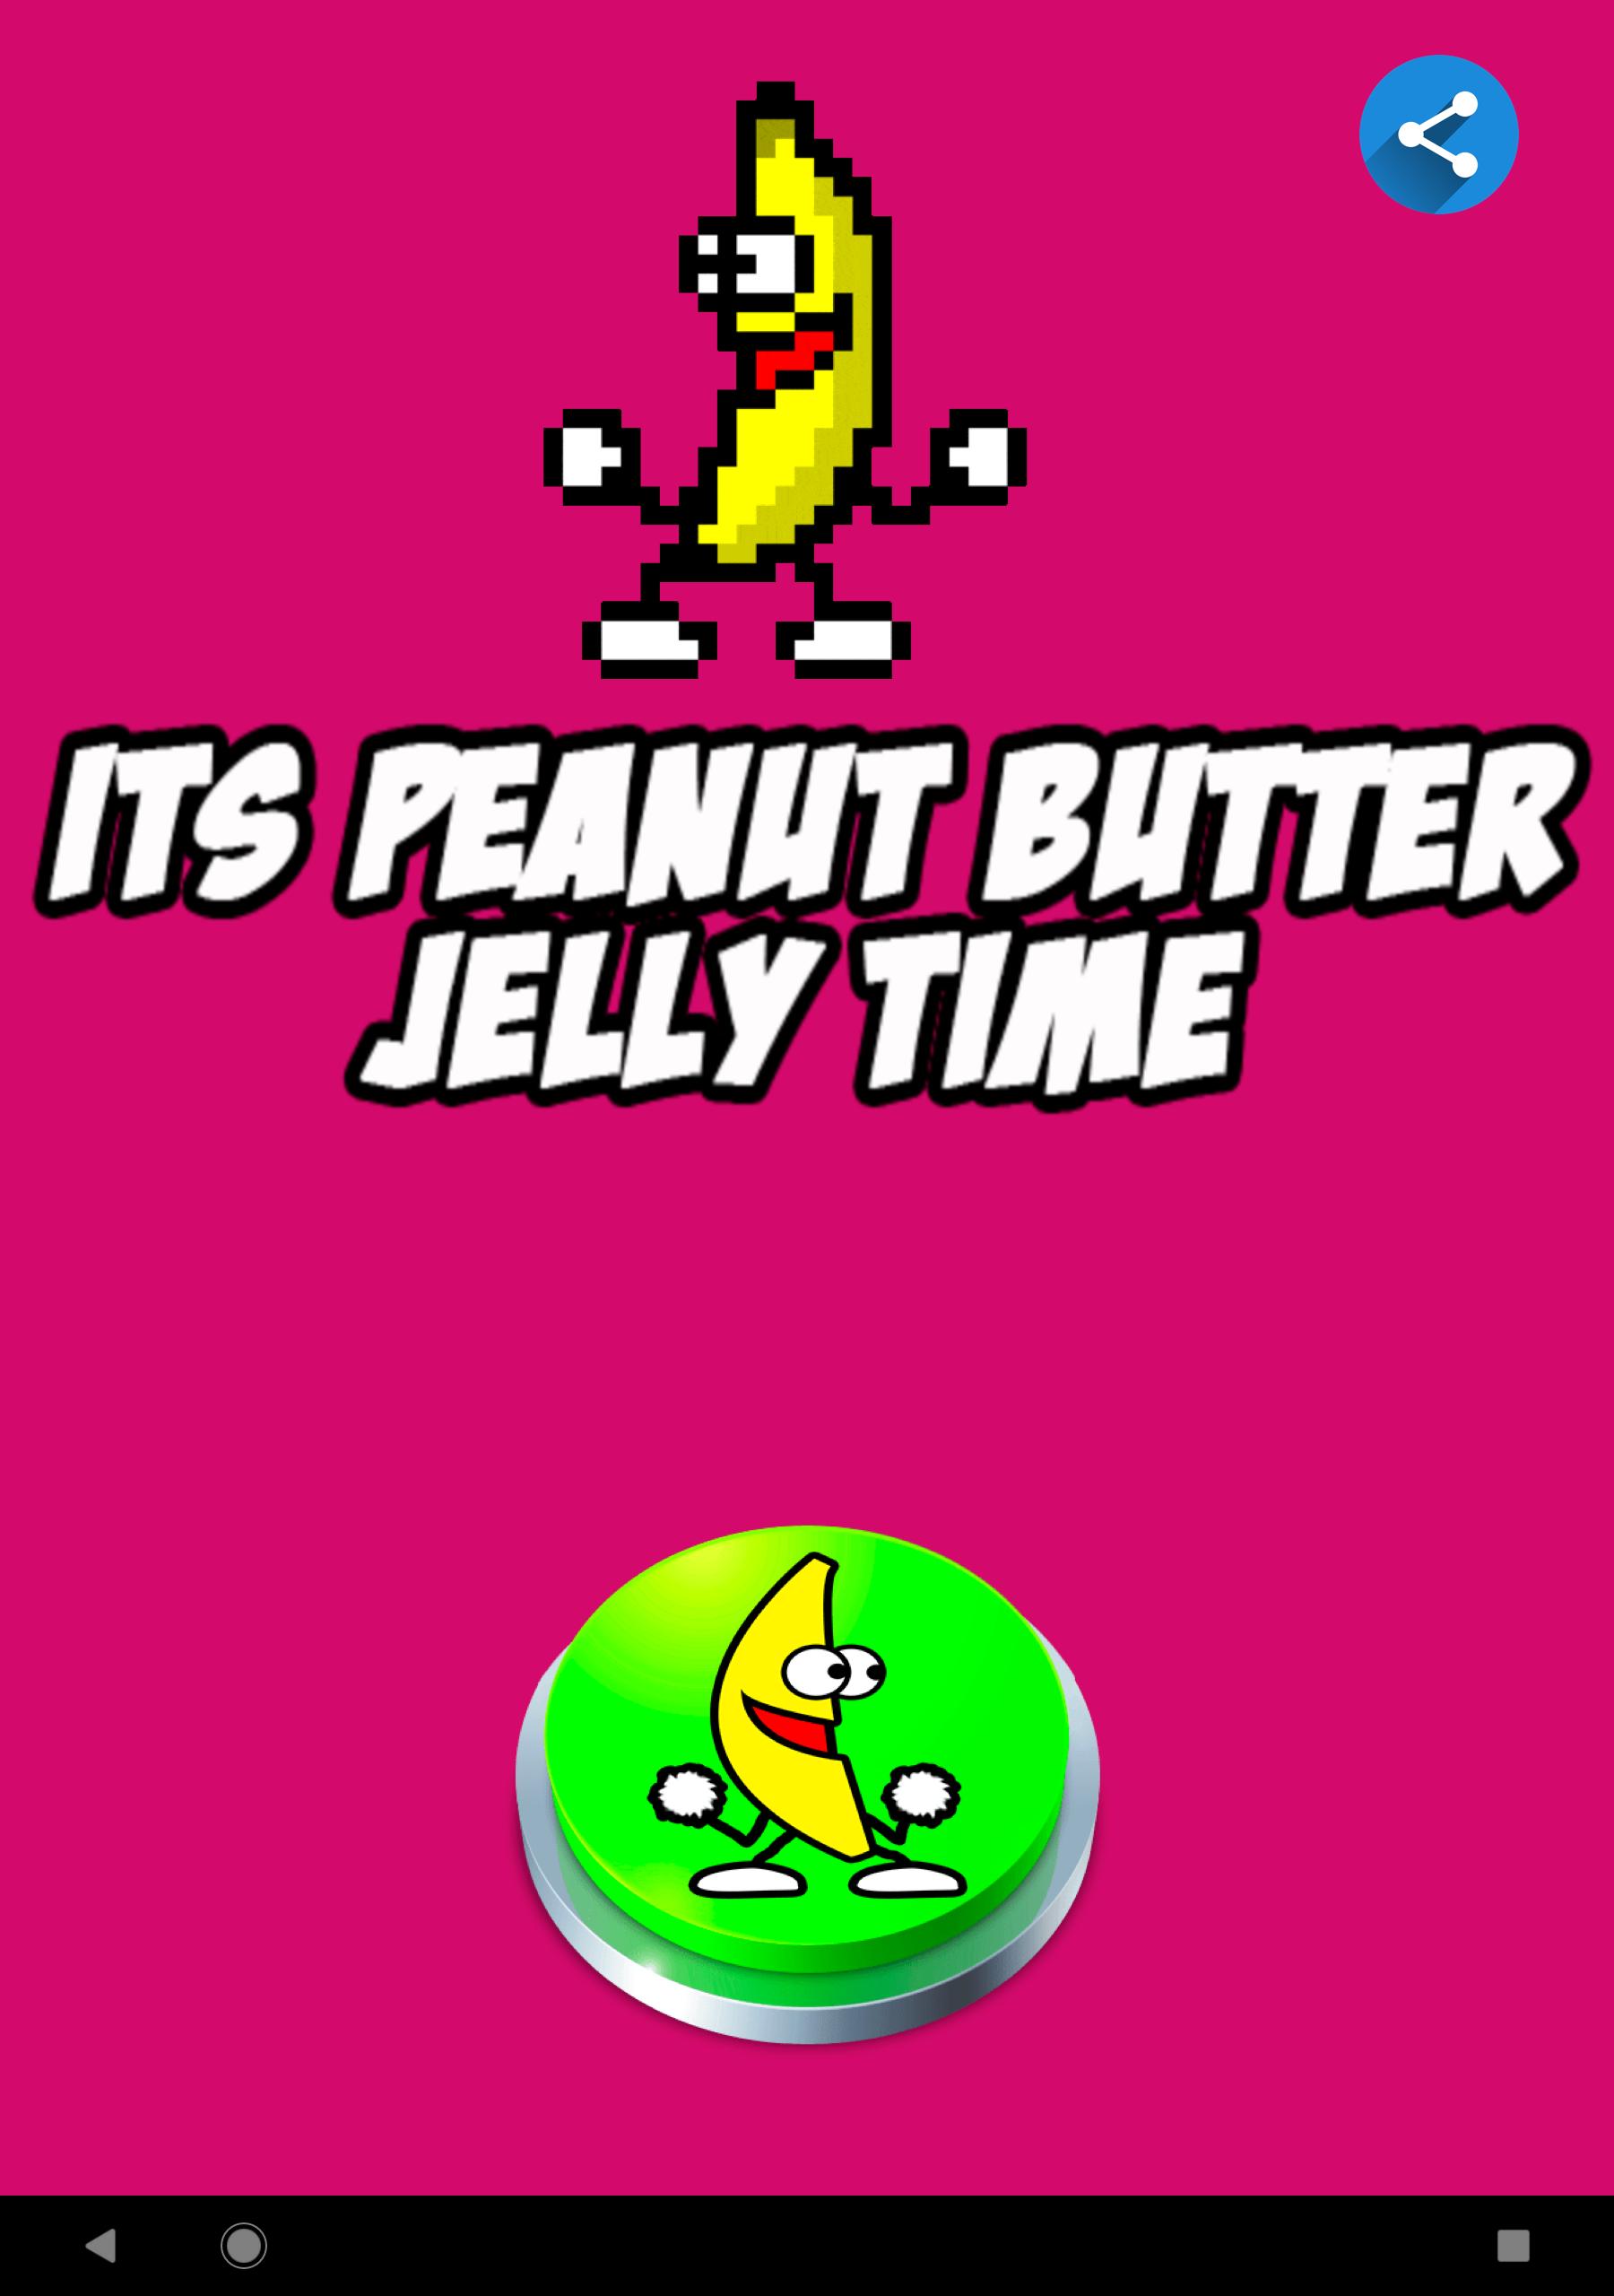 Peanut Butter Jelly time. Jelly time